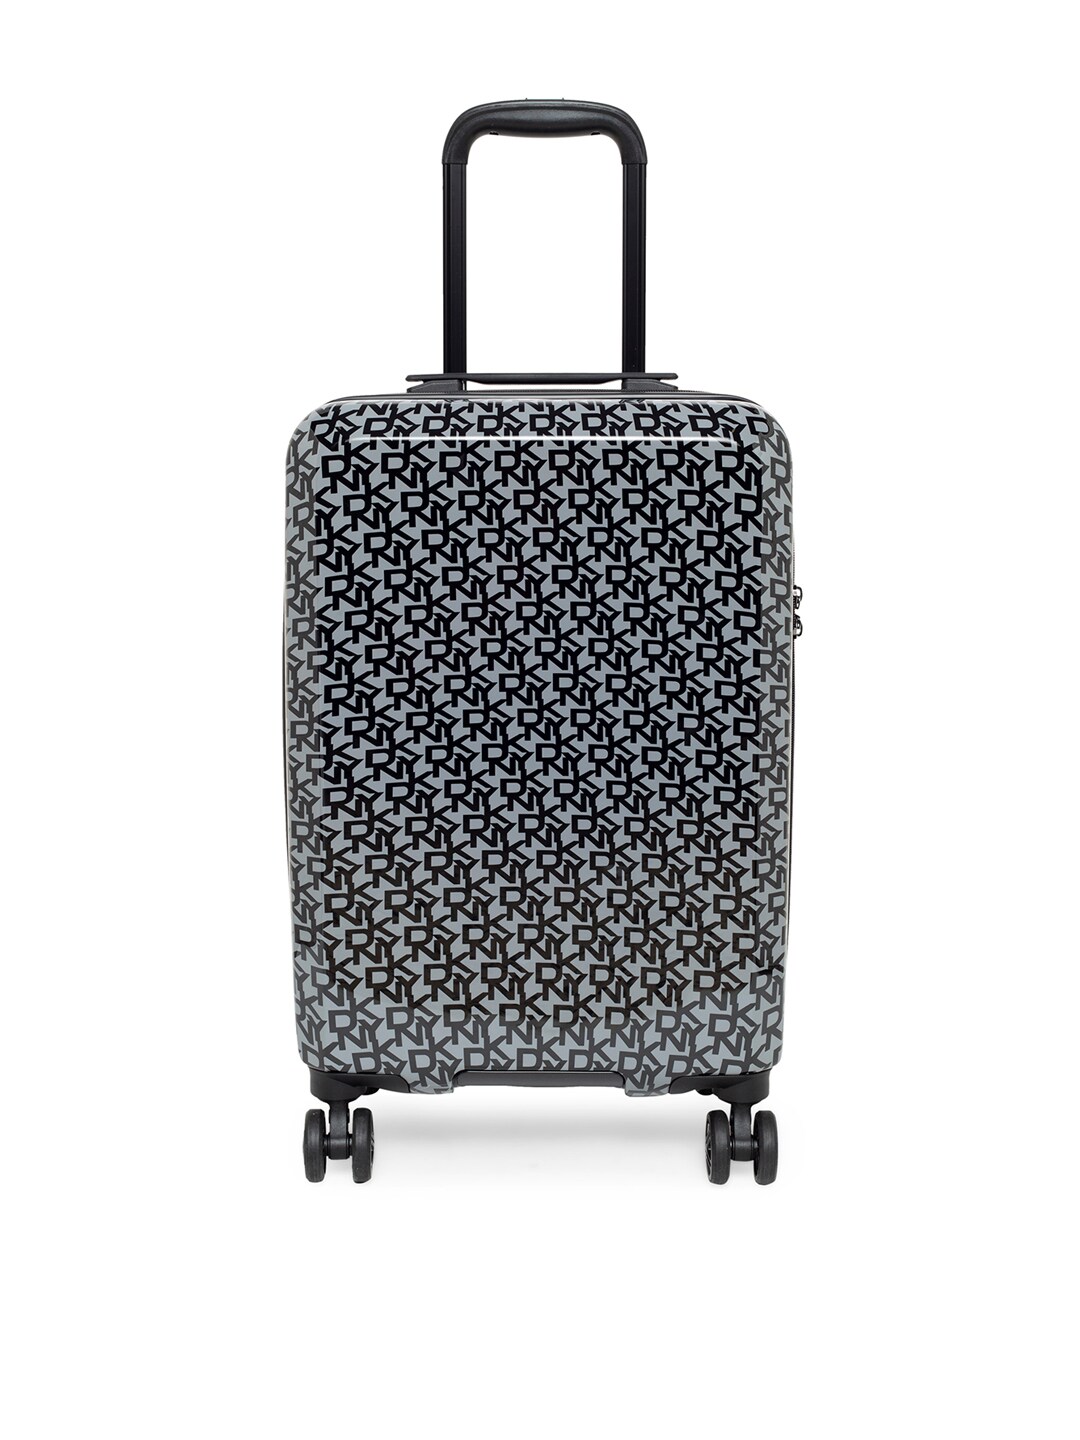 DKNY Grey Black Printed VINTAGE SIGNATURE Hard-Sided Cabin Trolley Suitcase Price in India